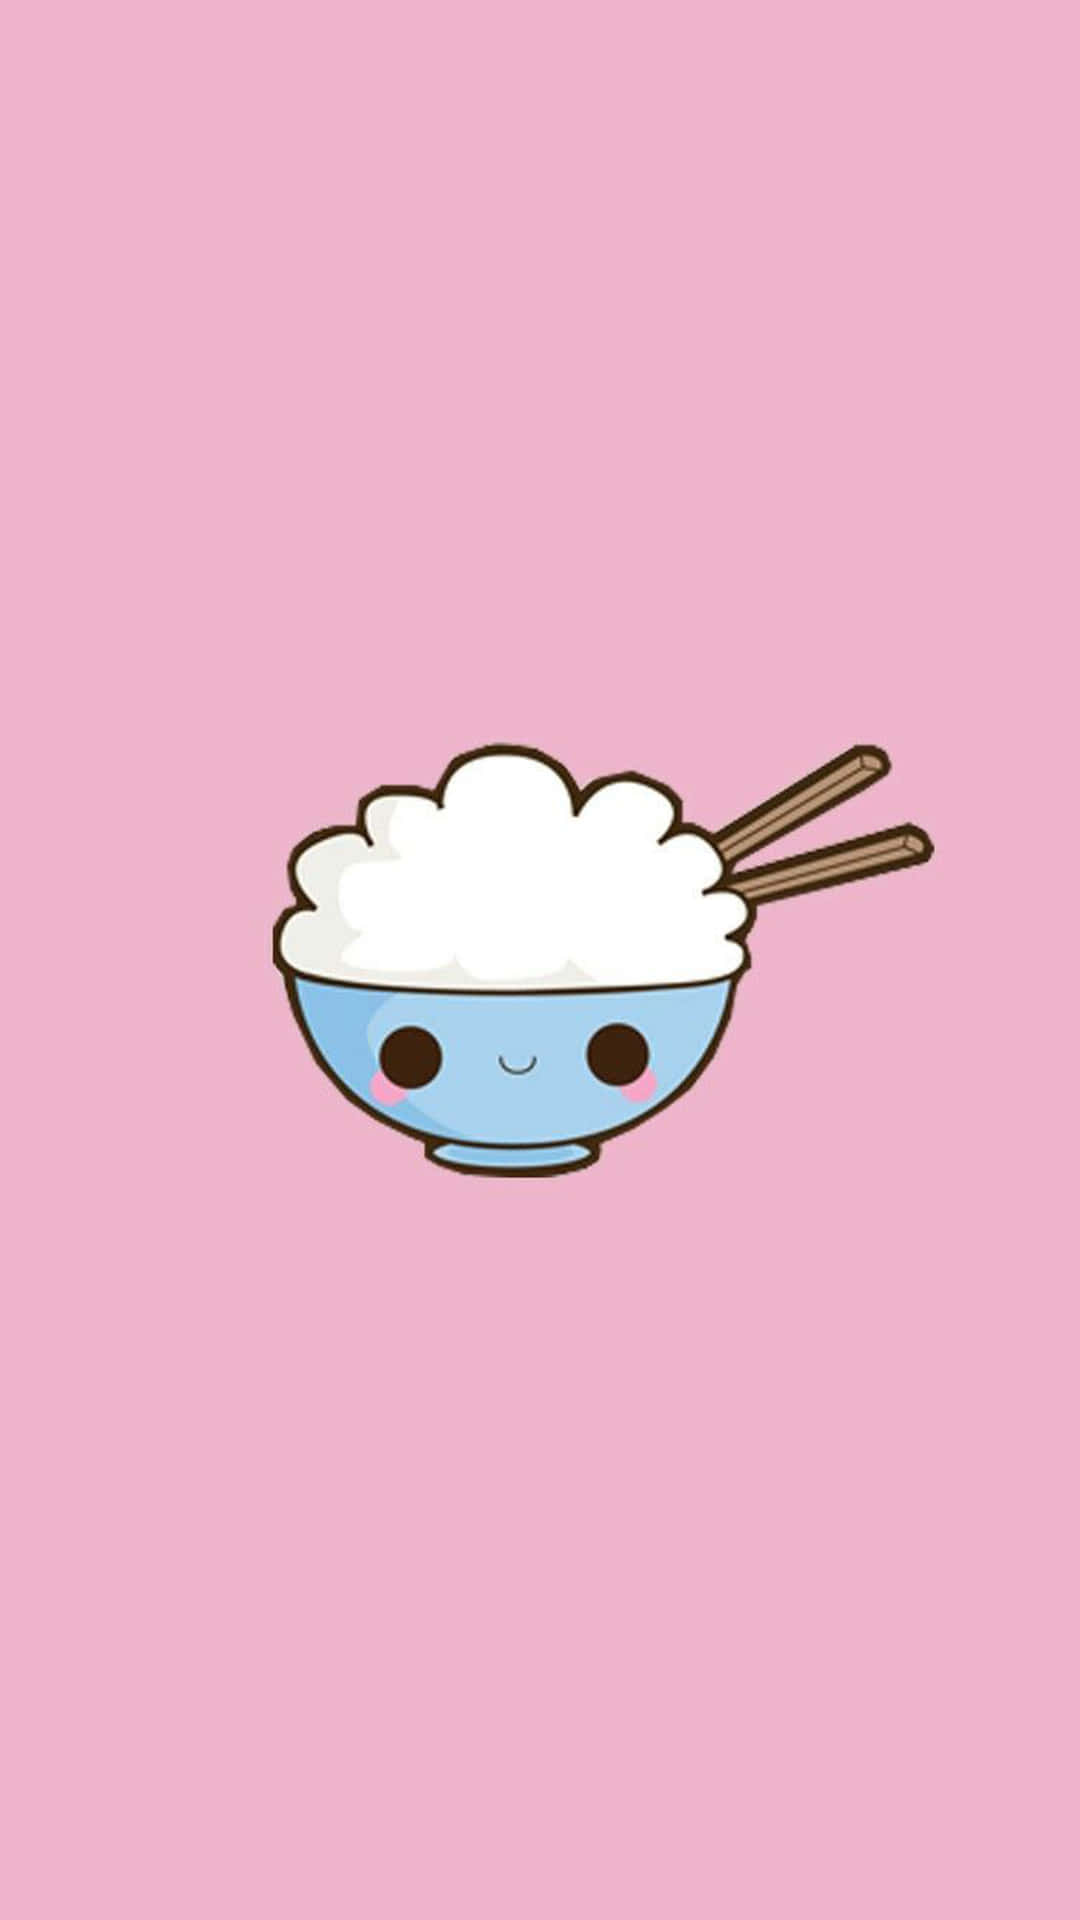 Rice Bowl Sticker Cute Things Background